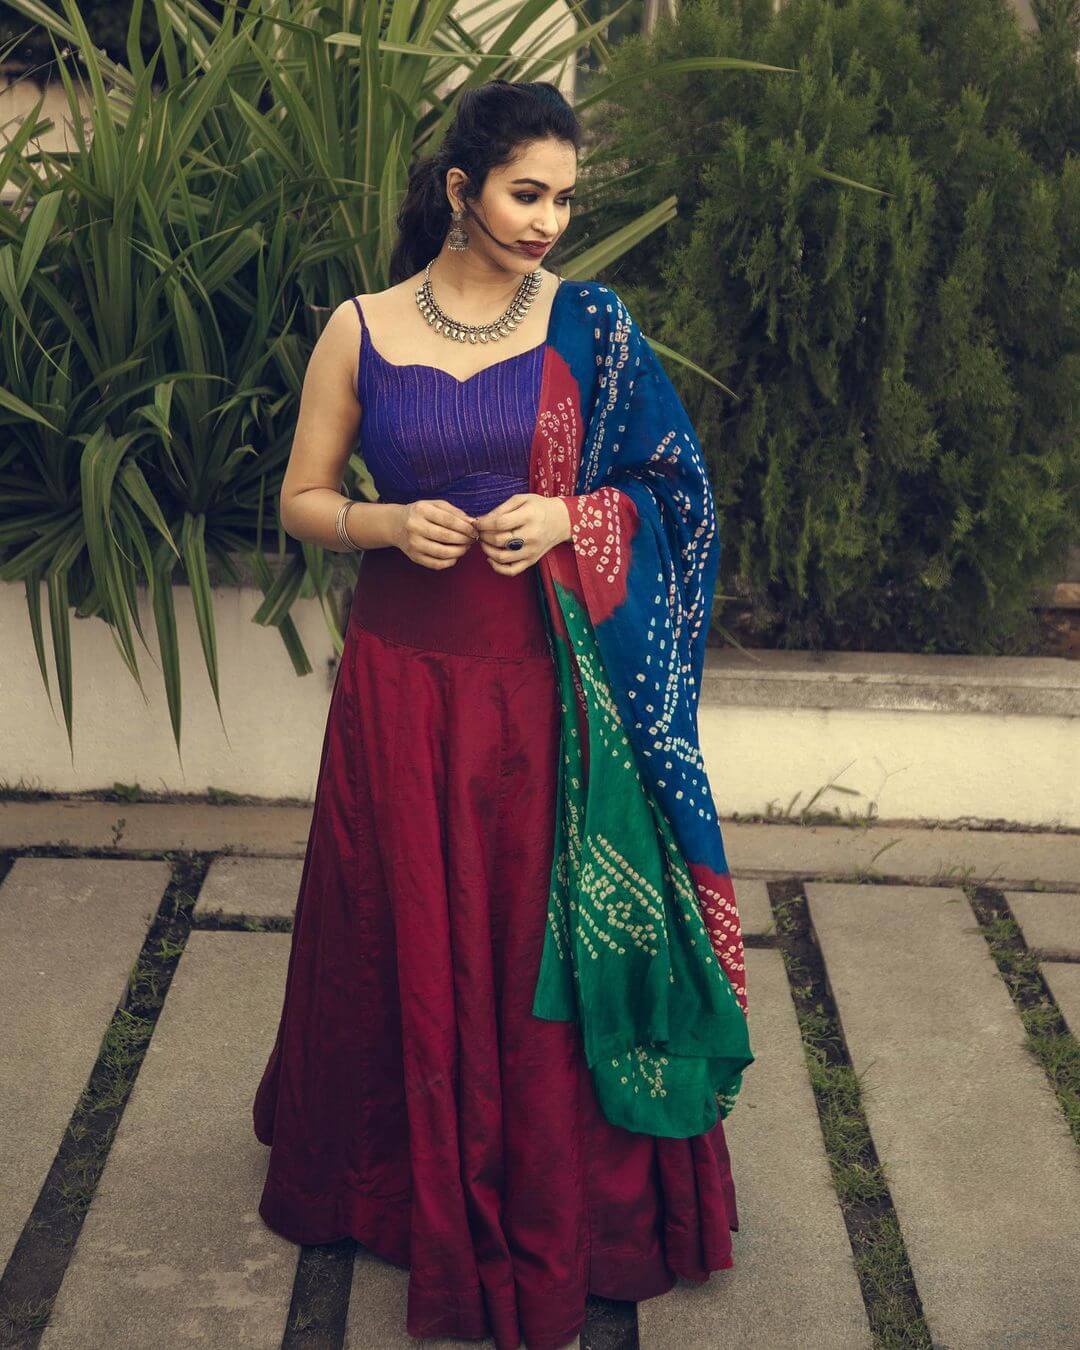 Misha Ghoshal Simple Festive Look In Maroon Skirt With Blue Noddle Strap Blouse Paired With Multi-Colour Bandhani Dupatta